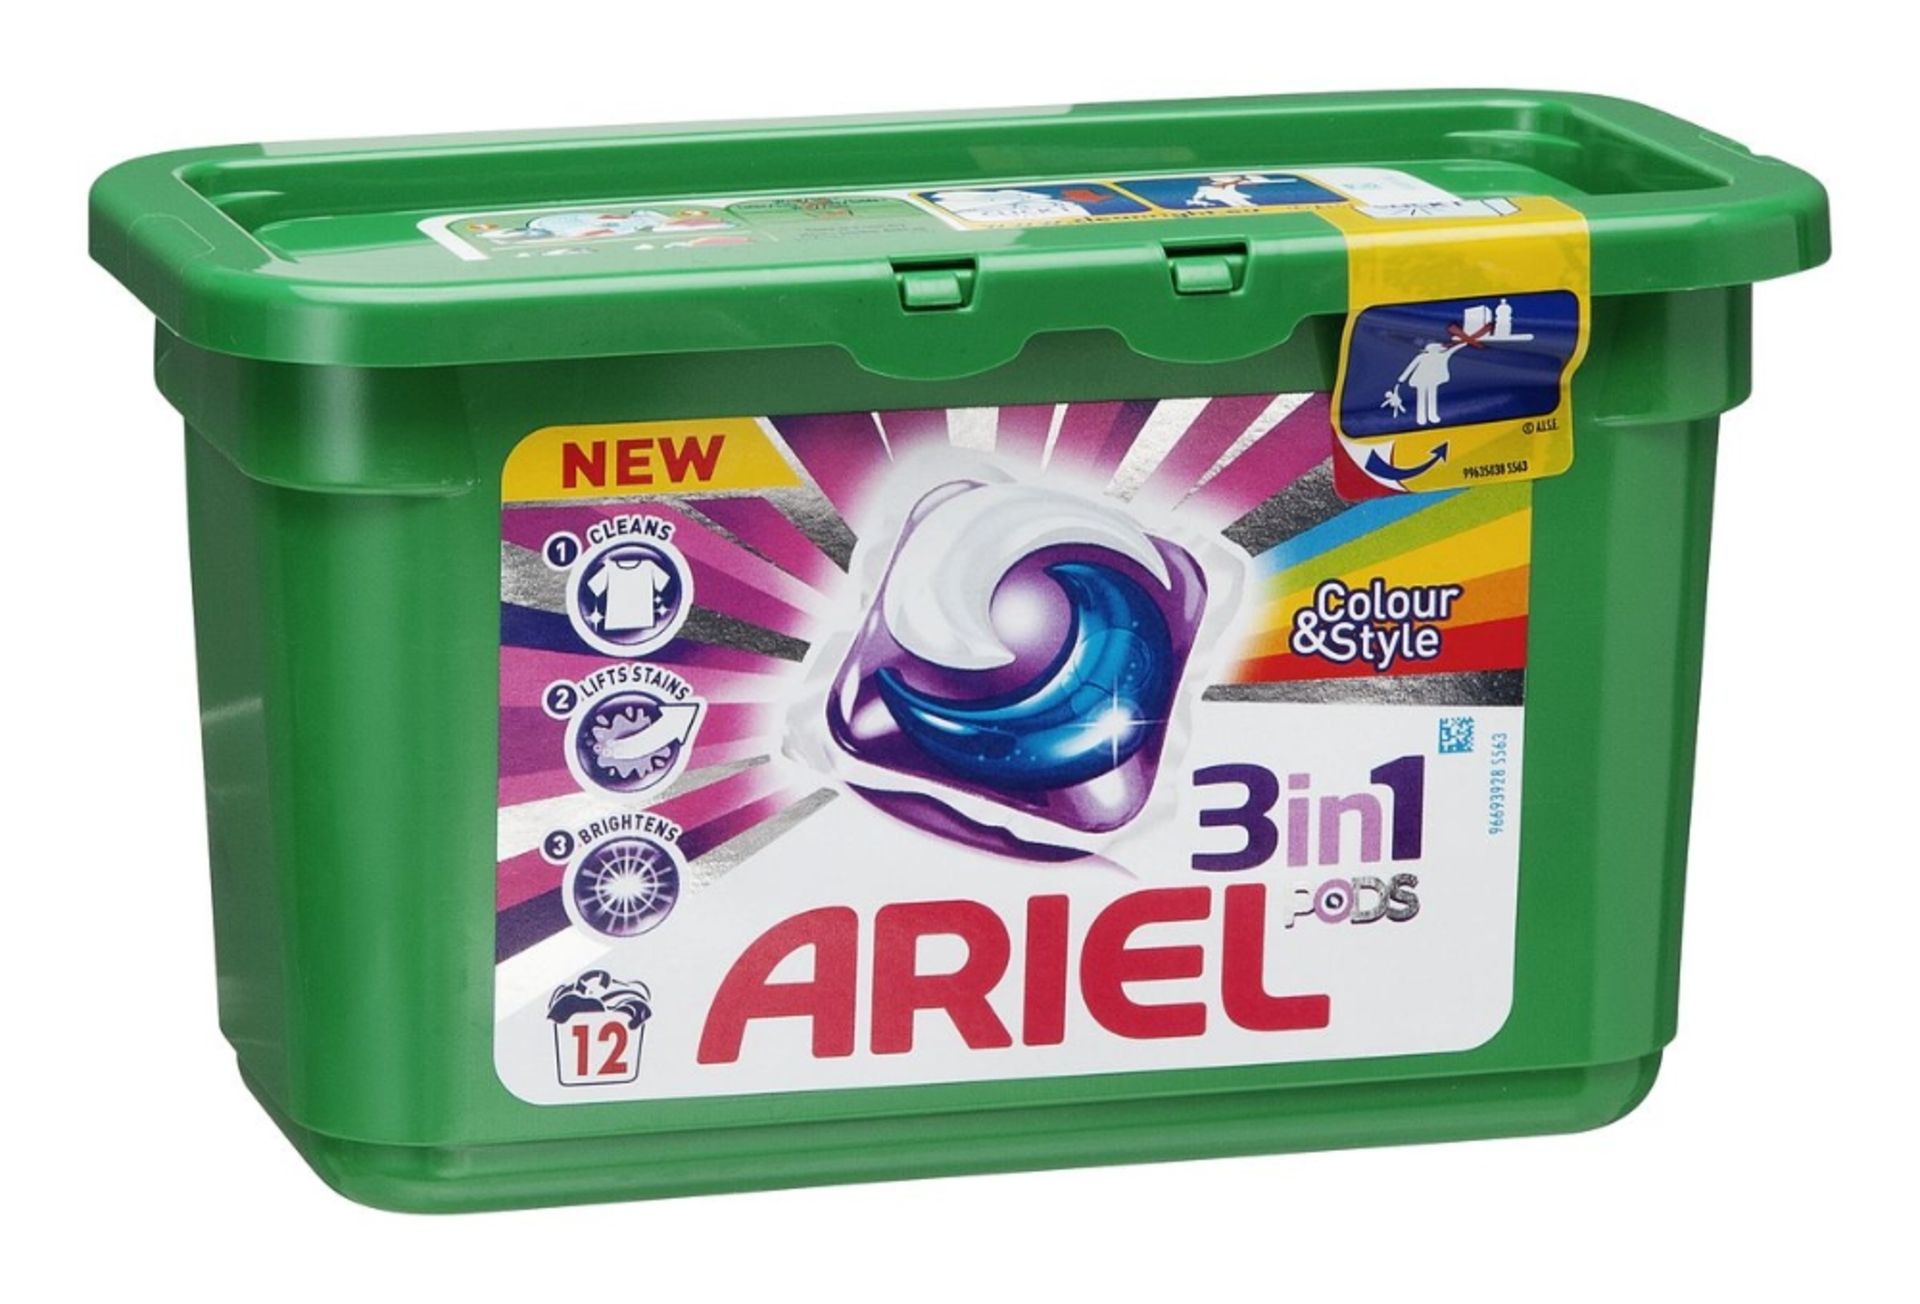 V *TRADE QTY* Brand New Ariel 3 In 1 Pods Colour 12 Pack X 6 YOUR BID PRICE TO BE MULTIPLIED BY SIX